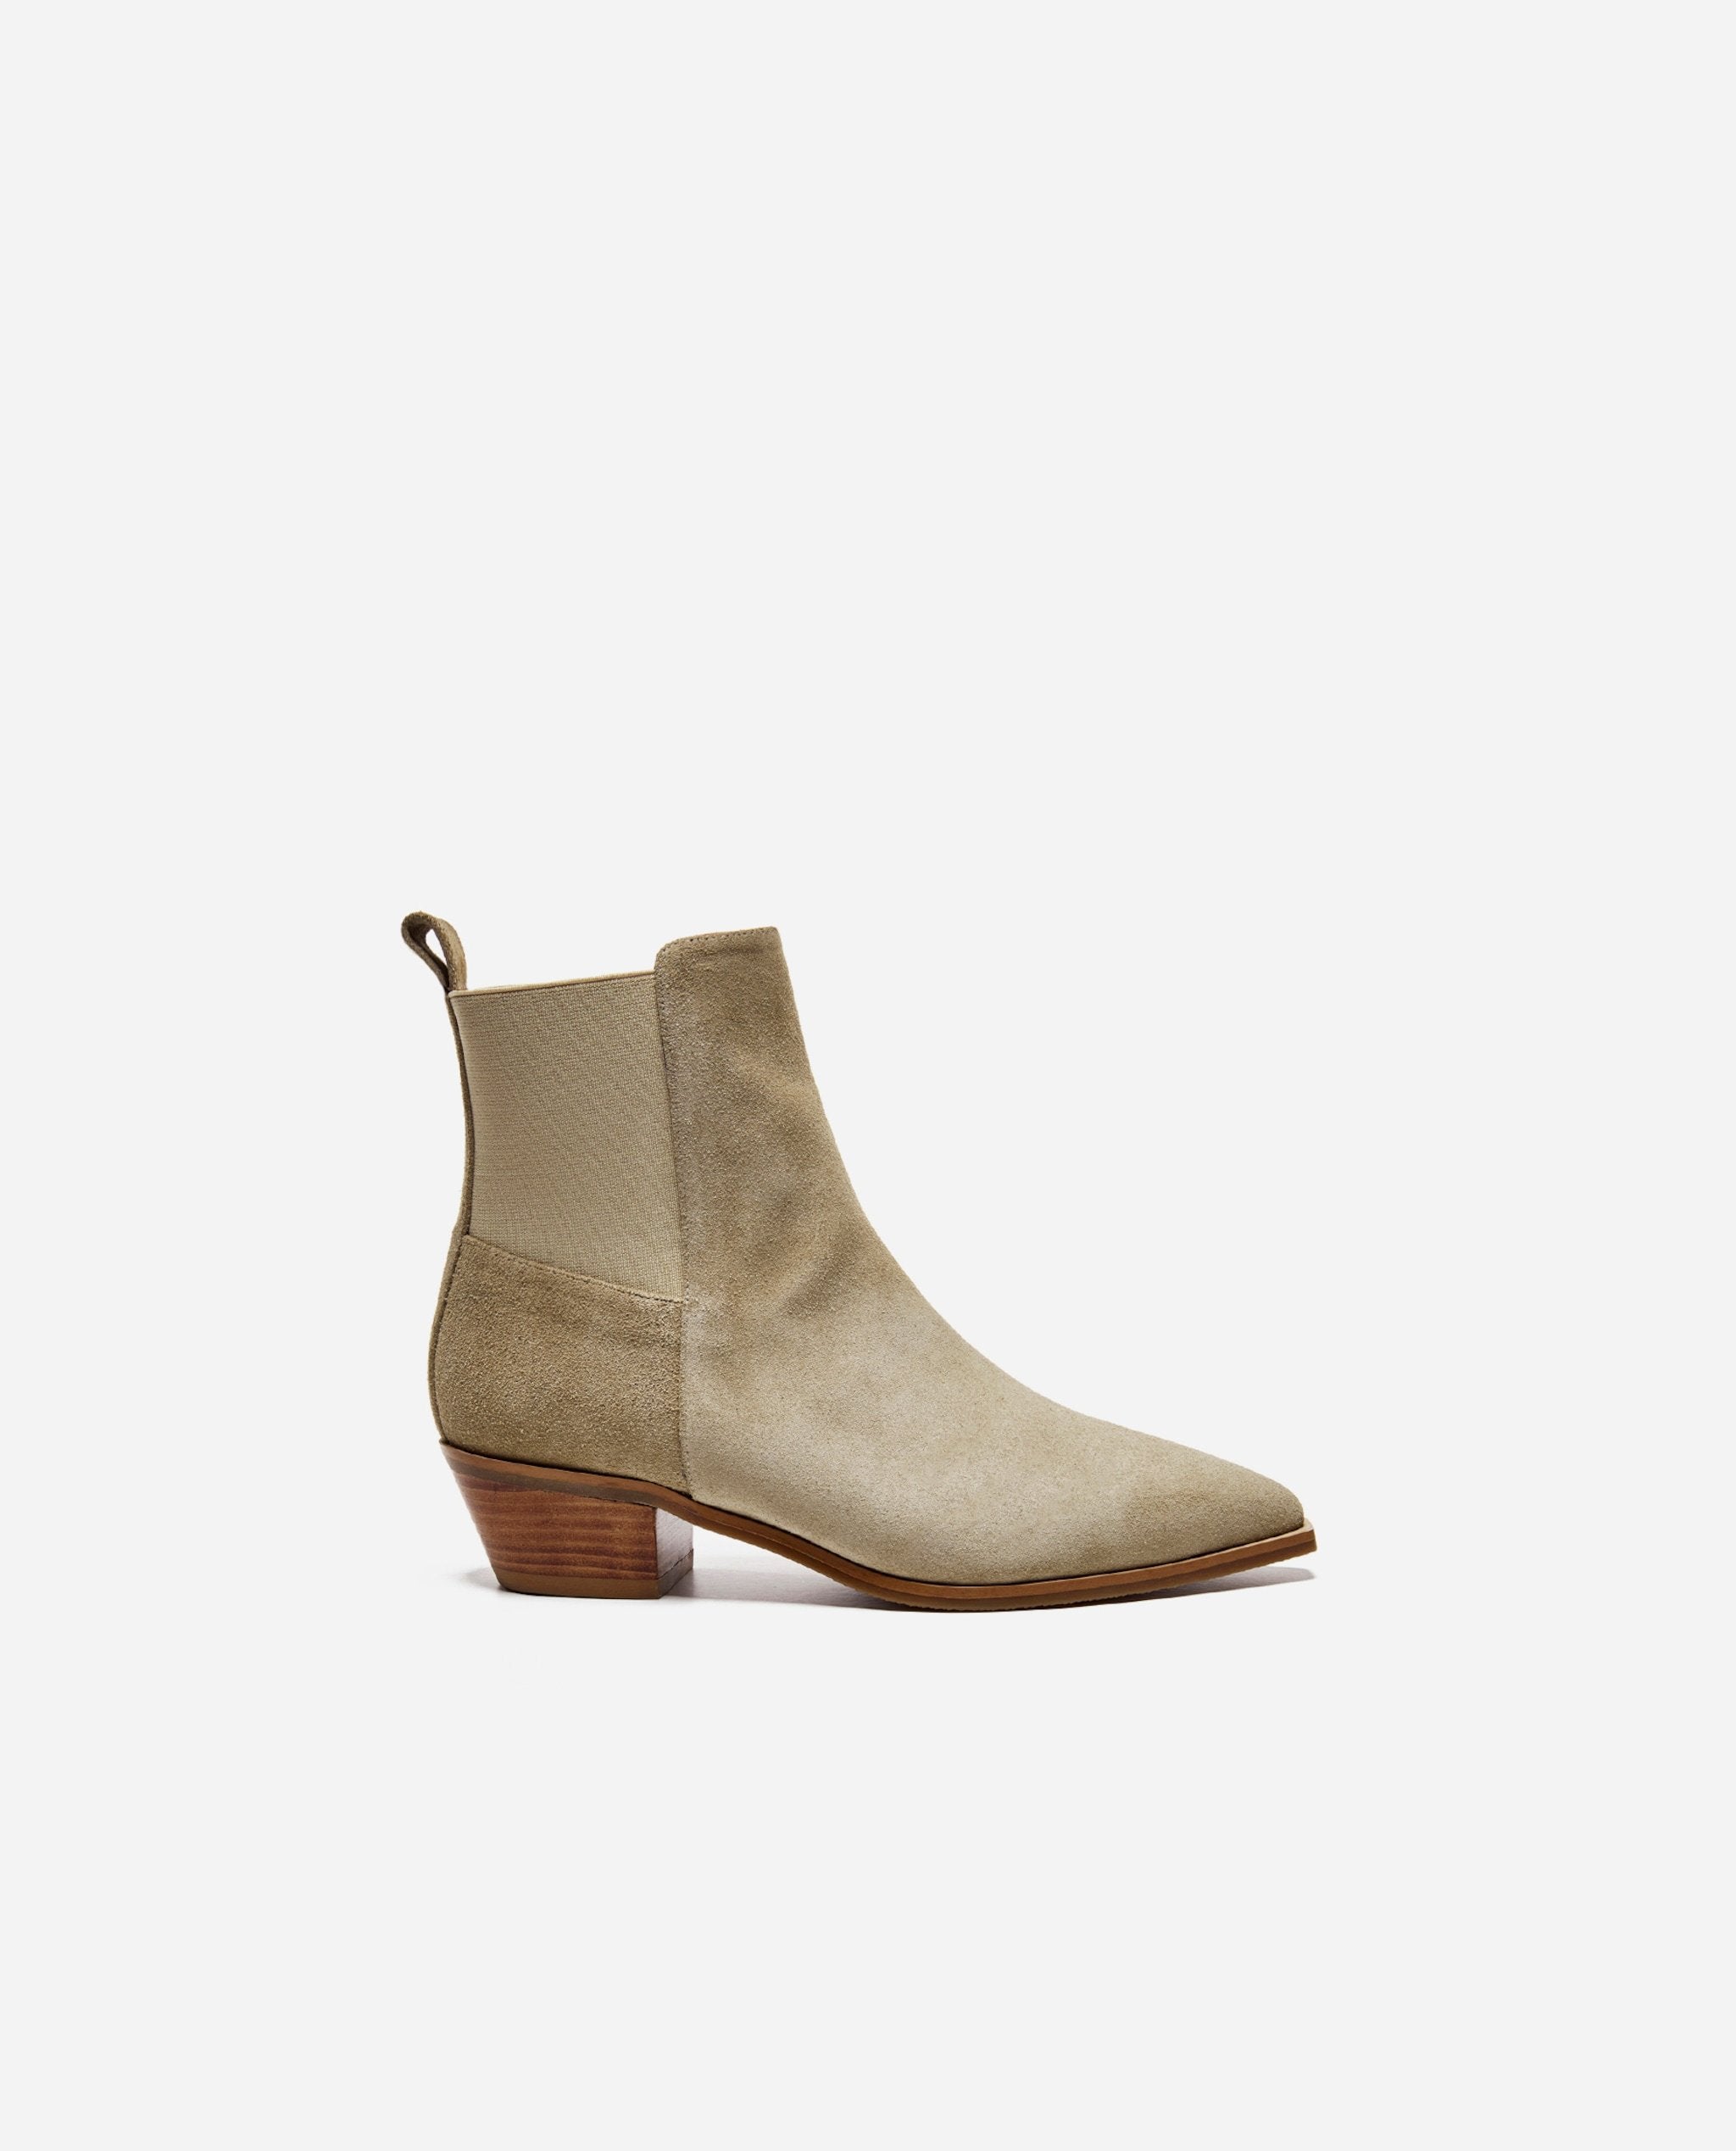 Willow Suede Sand Boots 21010814703-022 - 6